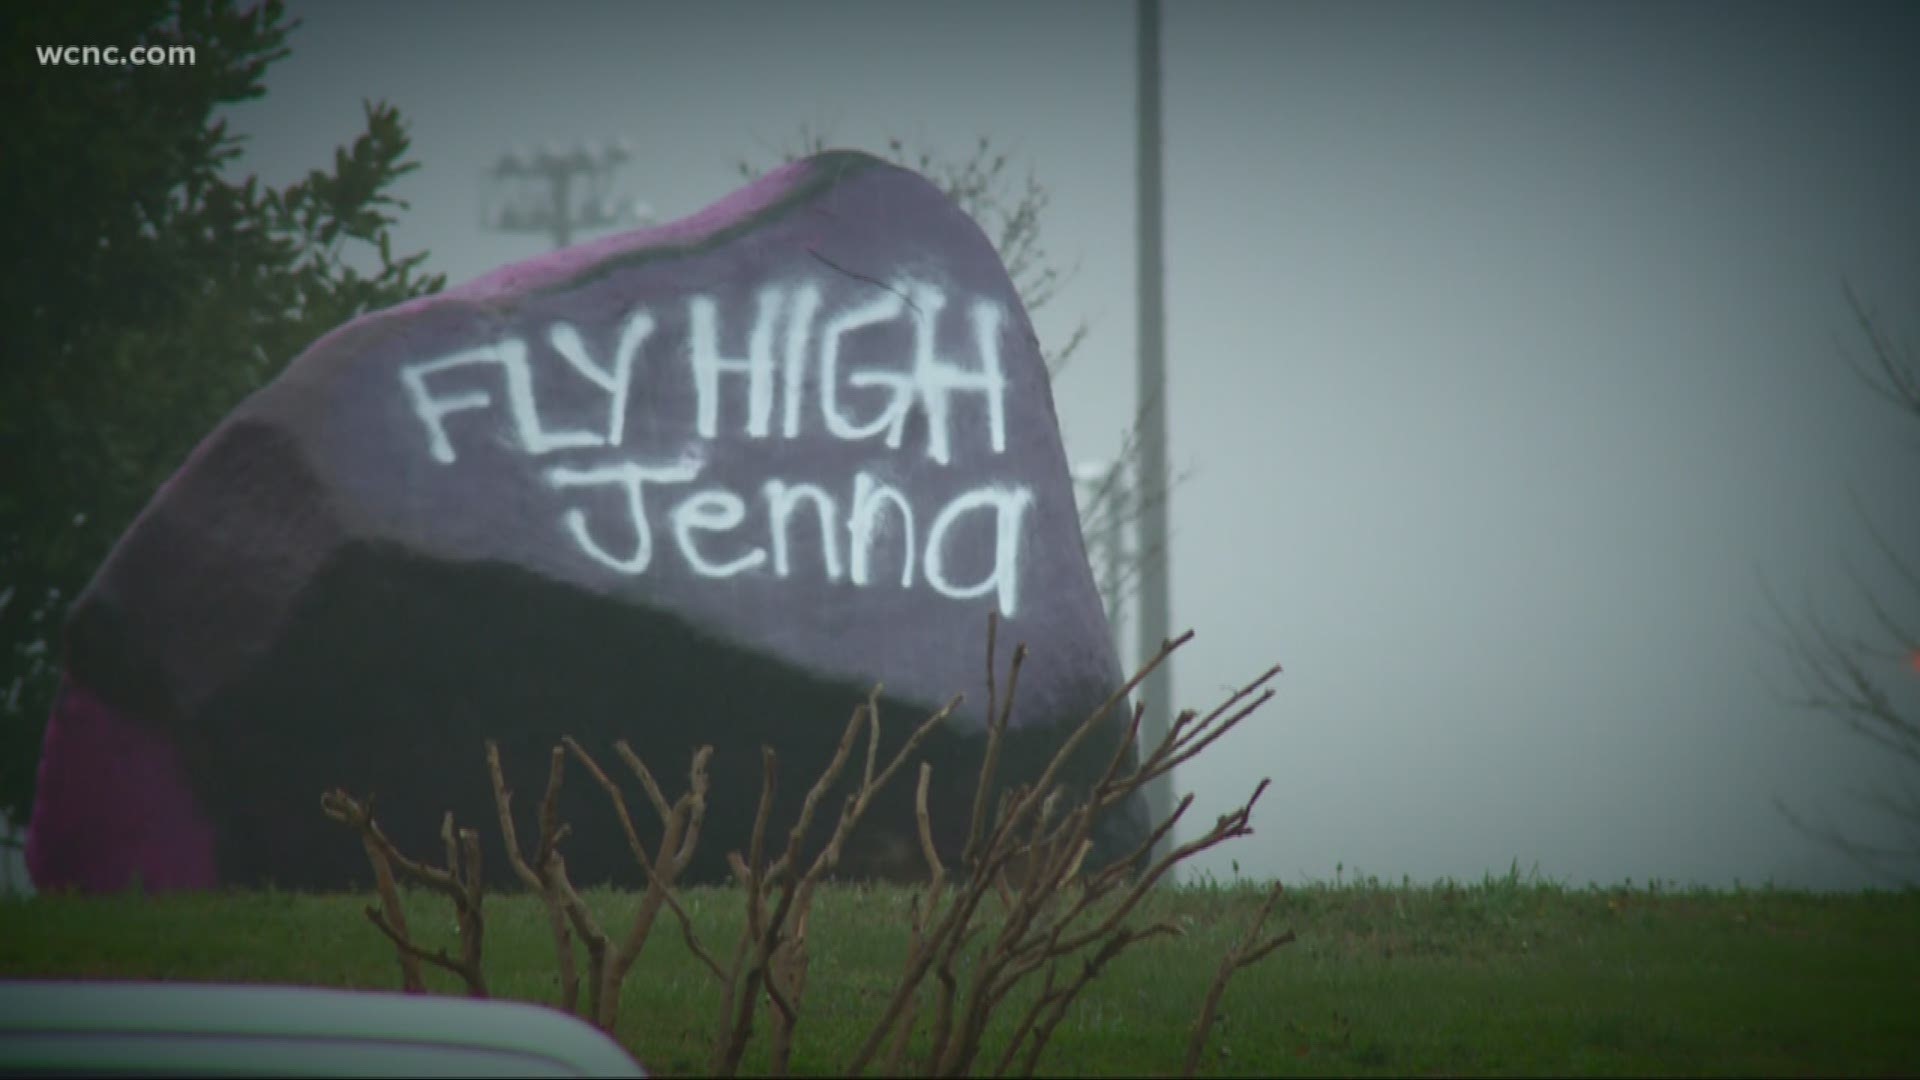 Today friends and family gathered for 15-year-old Jenna Hewitt's funeral.